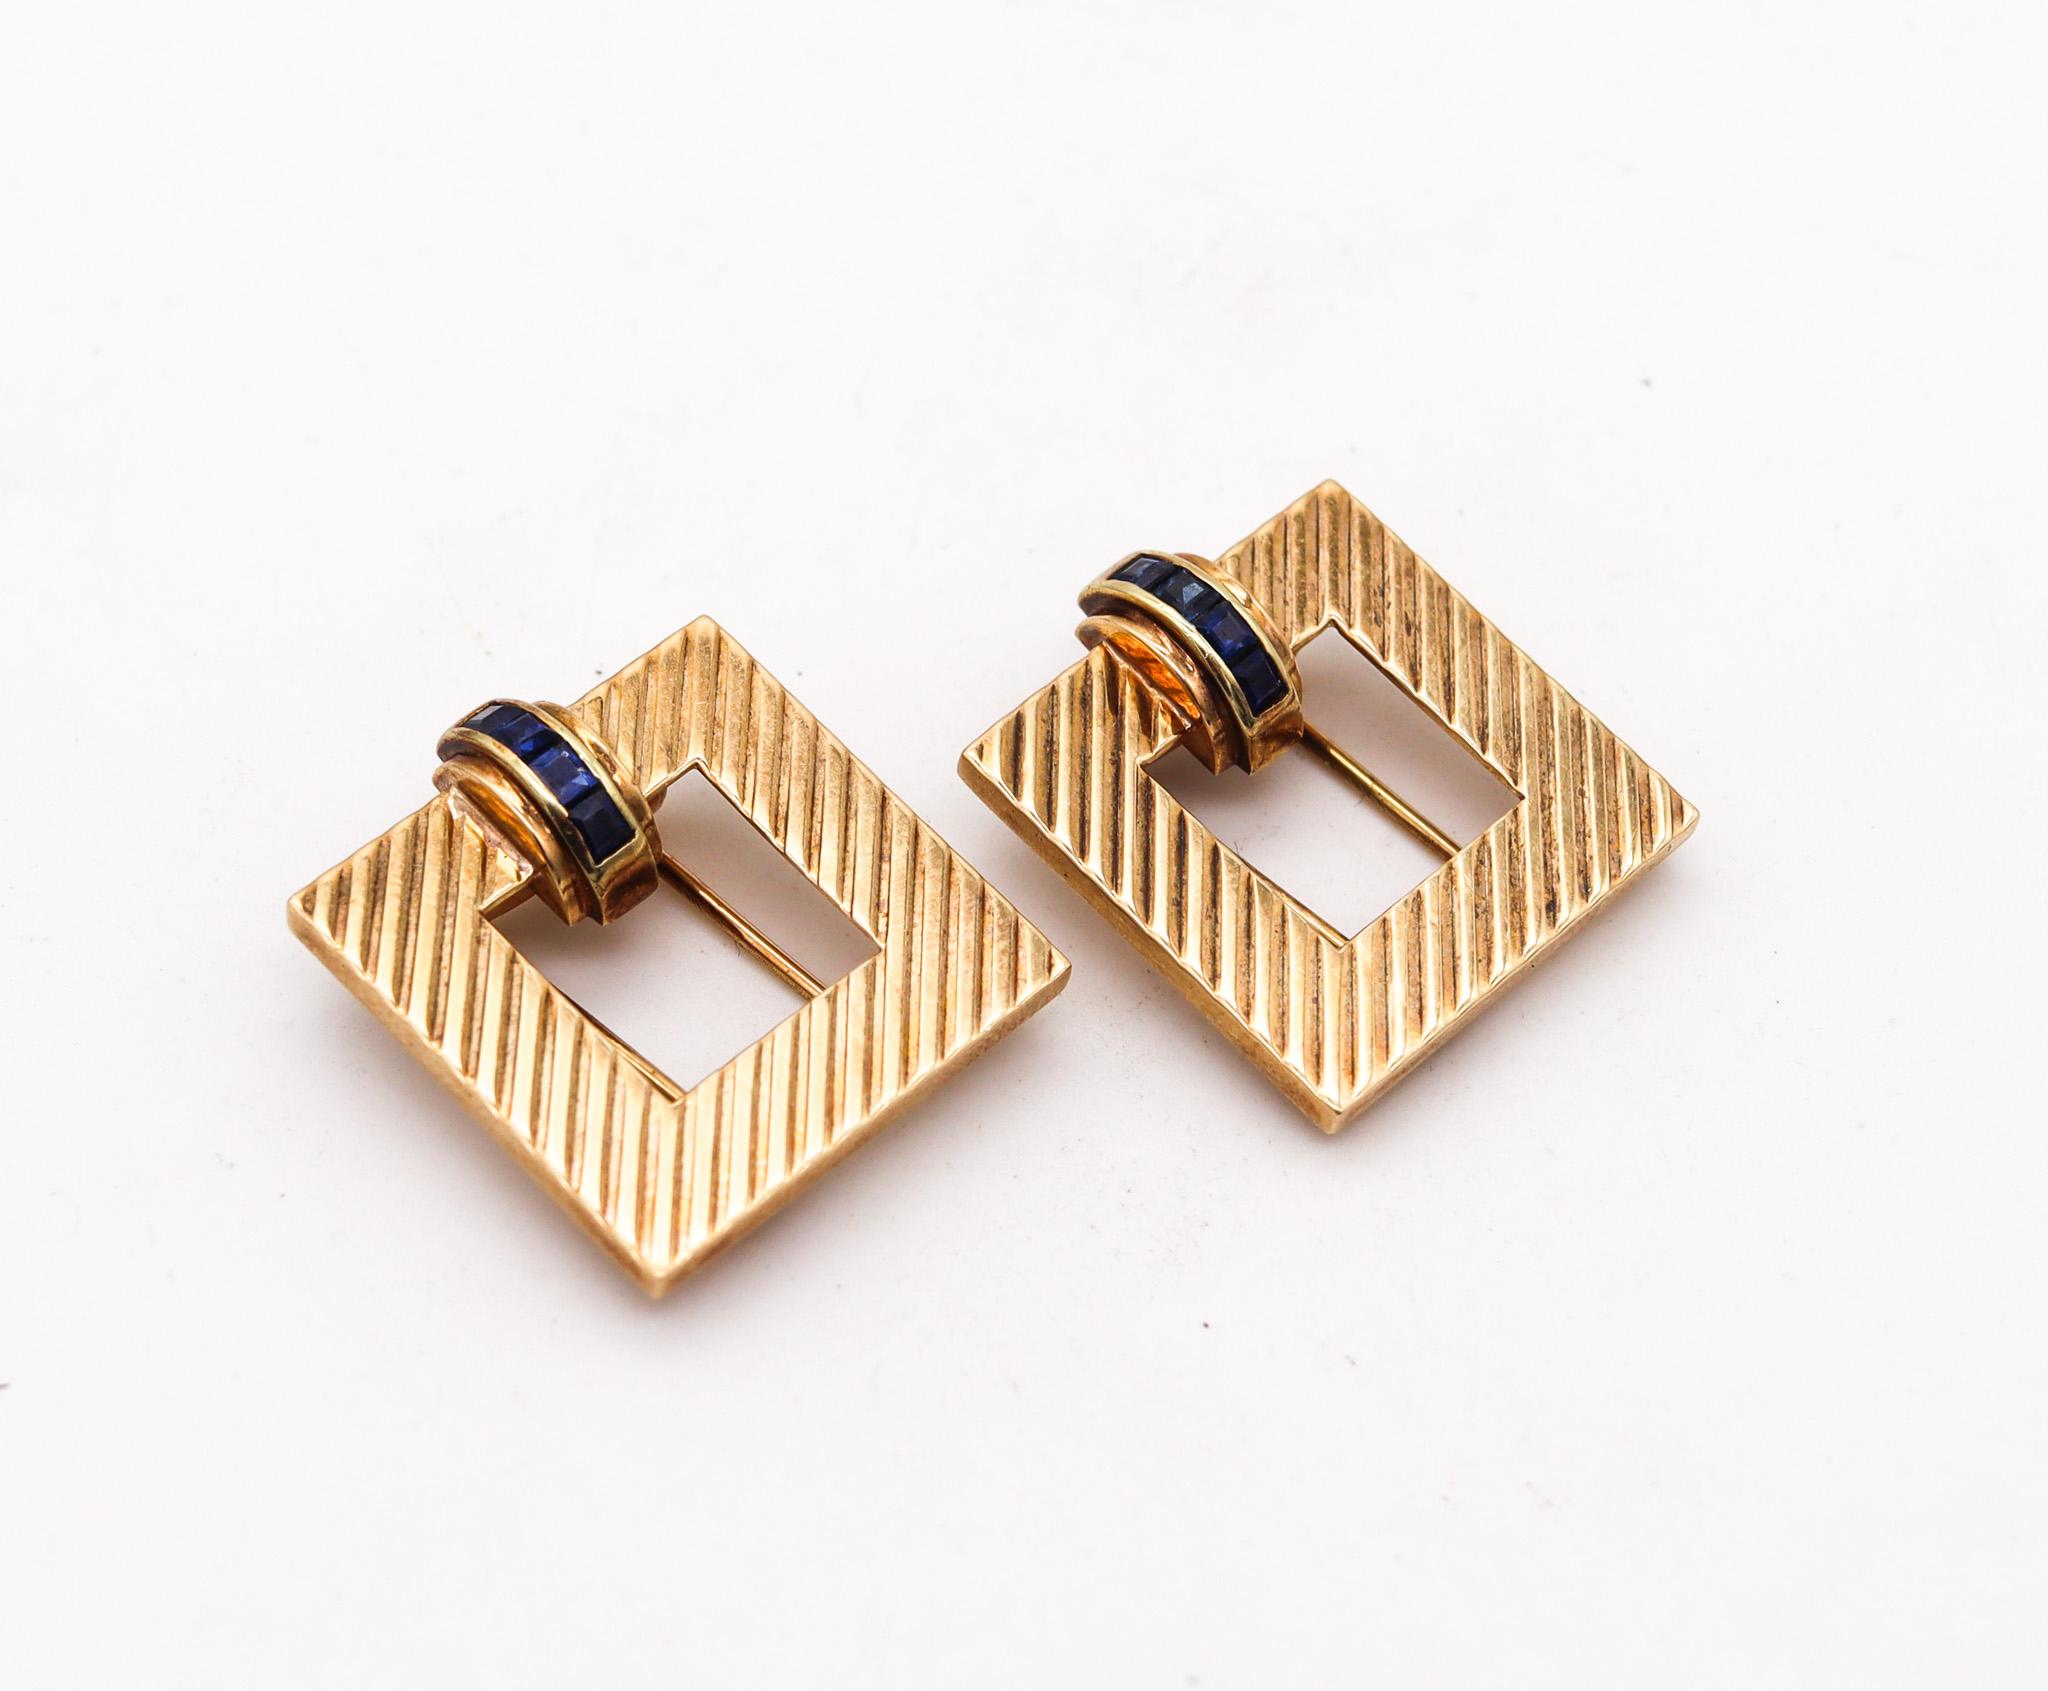 Pair of dress clips designed by Tiffany & Co. 

A beautiful pair of dress clips, created in New York city at the Tiffany Studios during the late art deco period, circa 1940. These dress clips has been carefully crafted with retro and machine age